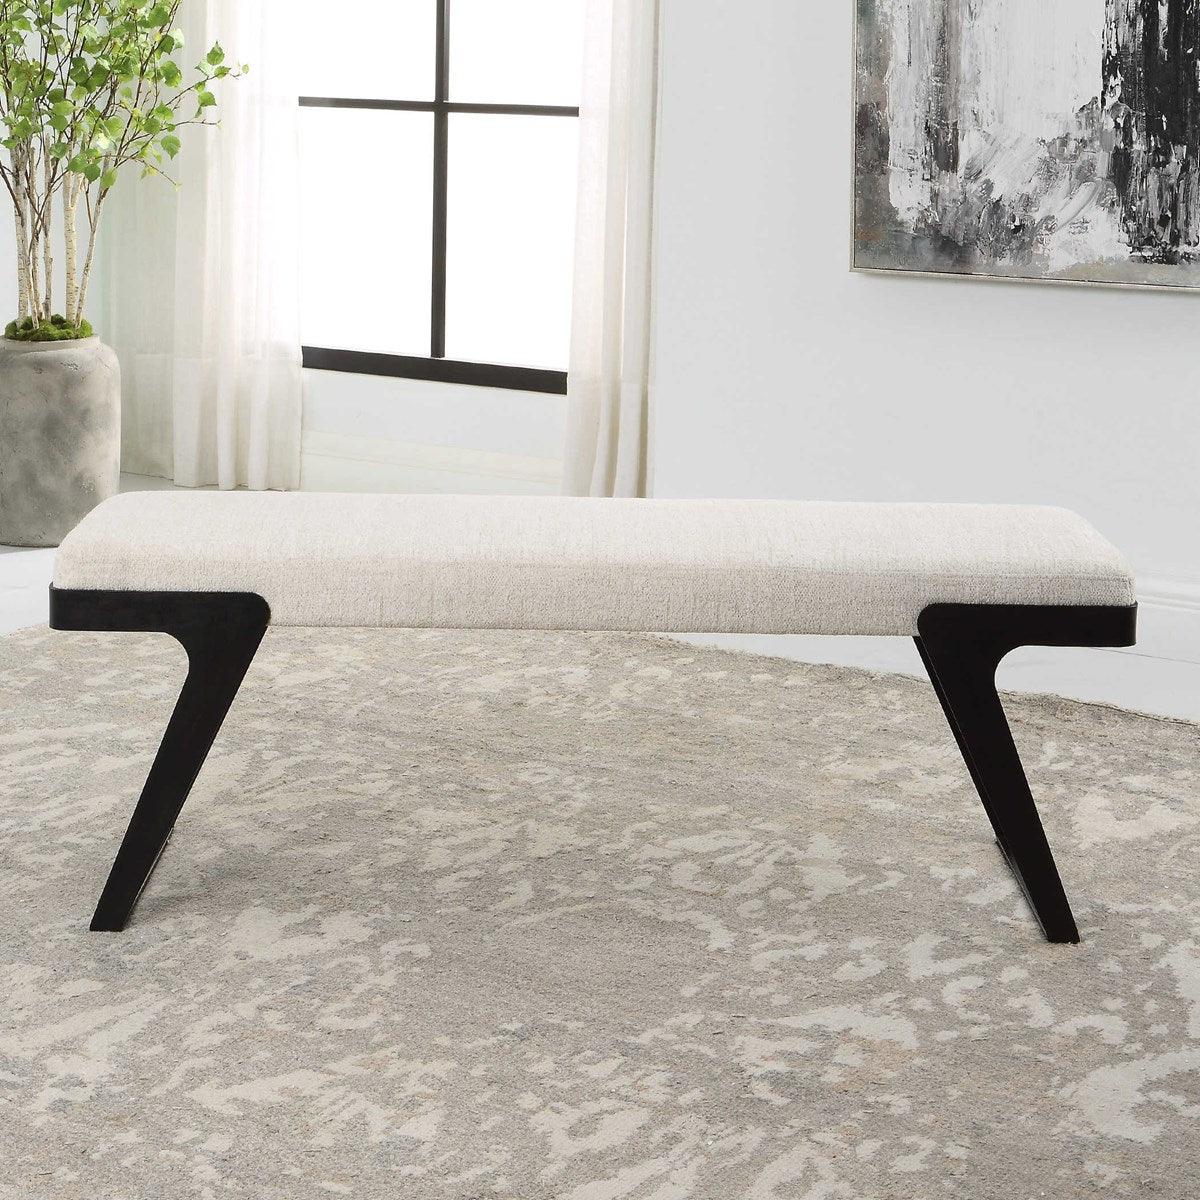 The Uttermost - Hover Bench - 23758 | Montreal Lighting & Hardware